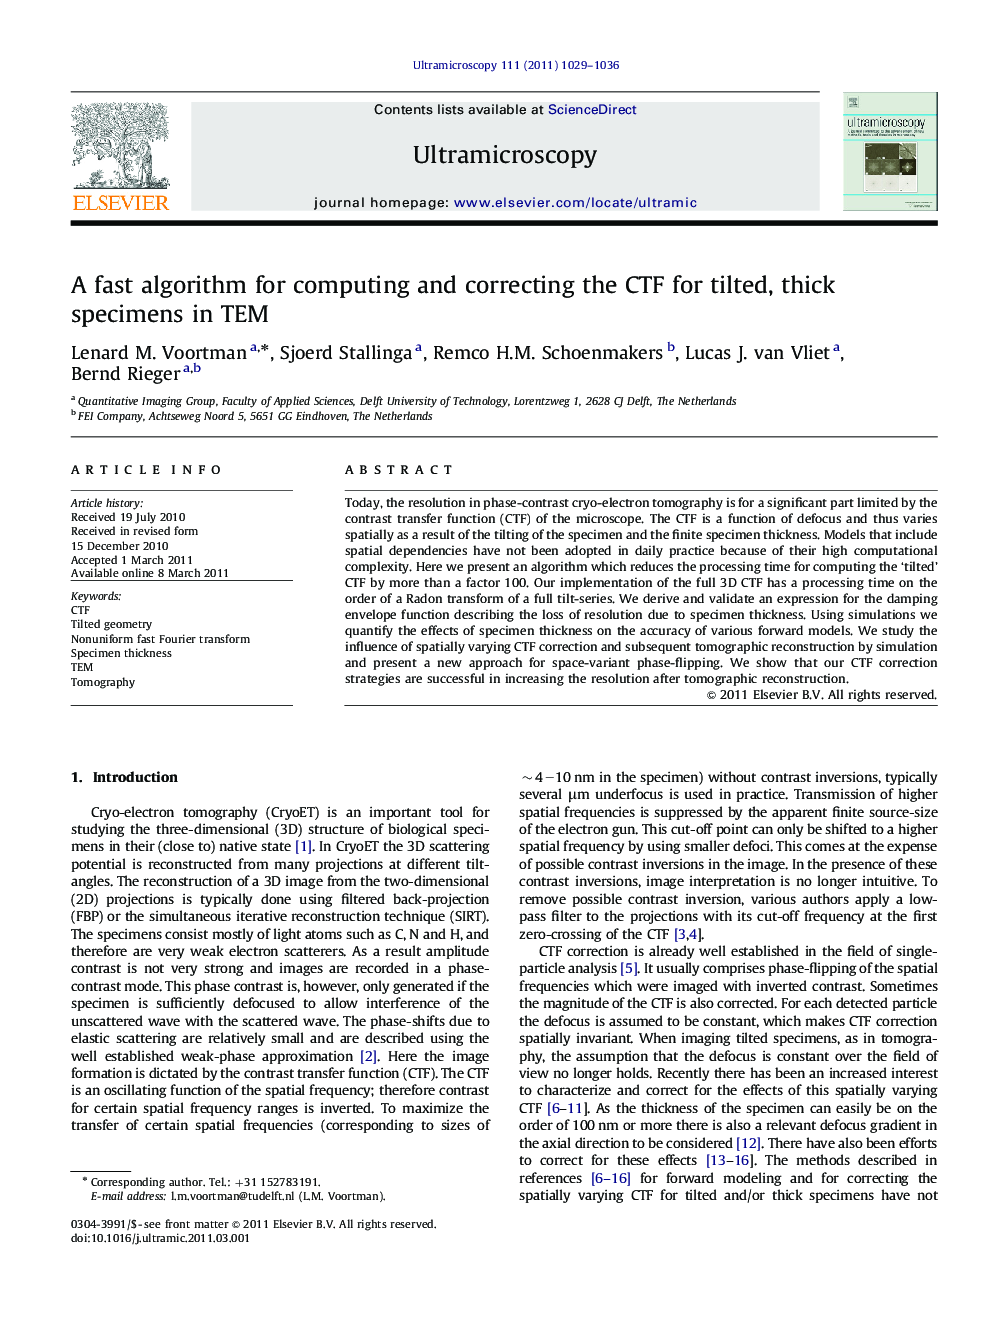 A fast algorithm for computing and correcting the CTF for tilted, thick specimens in TEM